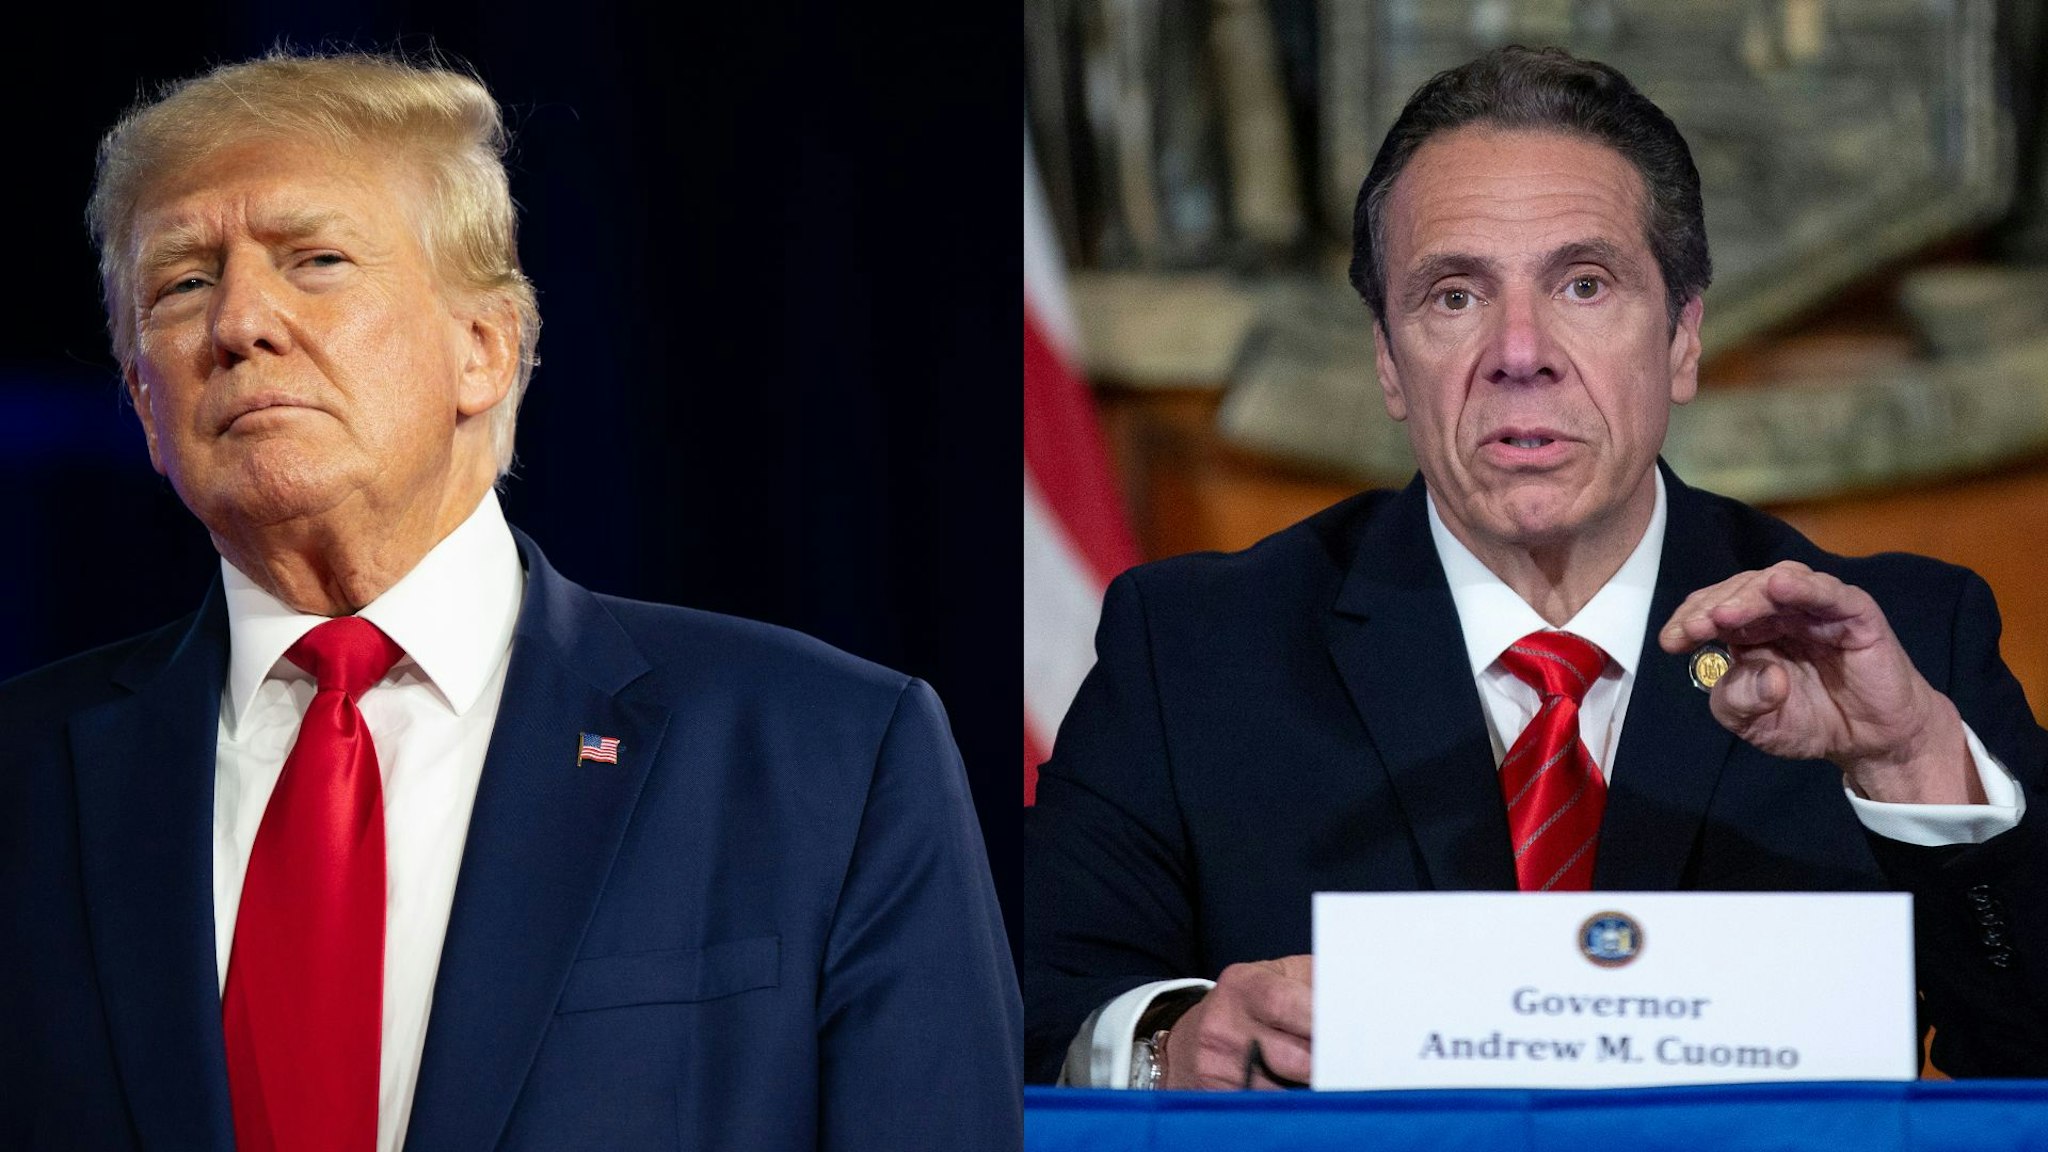 DALLAS, TEXAS - AUGUST 06: Former U.S. President Donald Trump speaks at the Conservative Political Action Conference (CPAC) at the Hilton Anatole on August 06, 2022 in Dallas, Texas. ALBANY, NY - MAY 01: New York State Governor Andrew Cuomo speaks during his daily press briefing on May 1, 2020 in Albany, New York. Cuomo stated that New York will eliminate deductibles for mental health services for frontline workers.